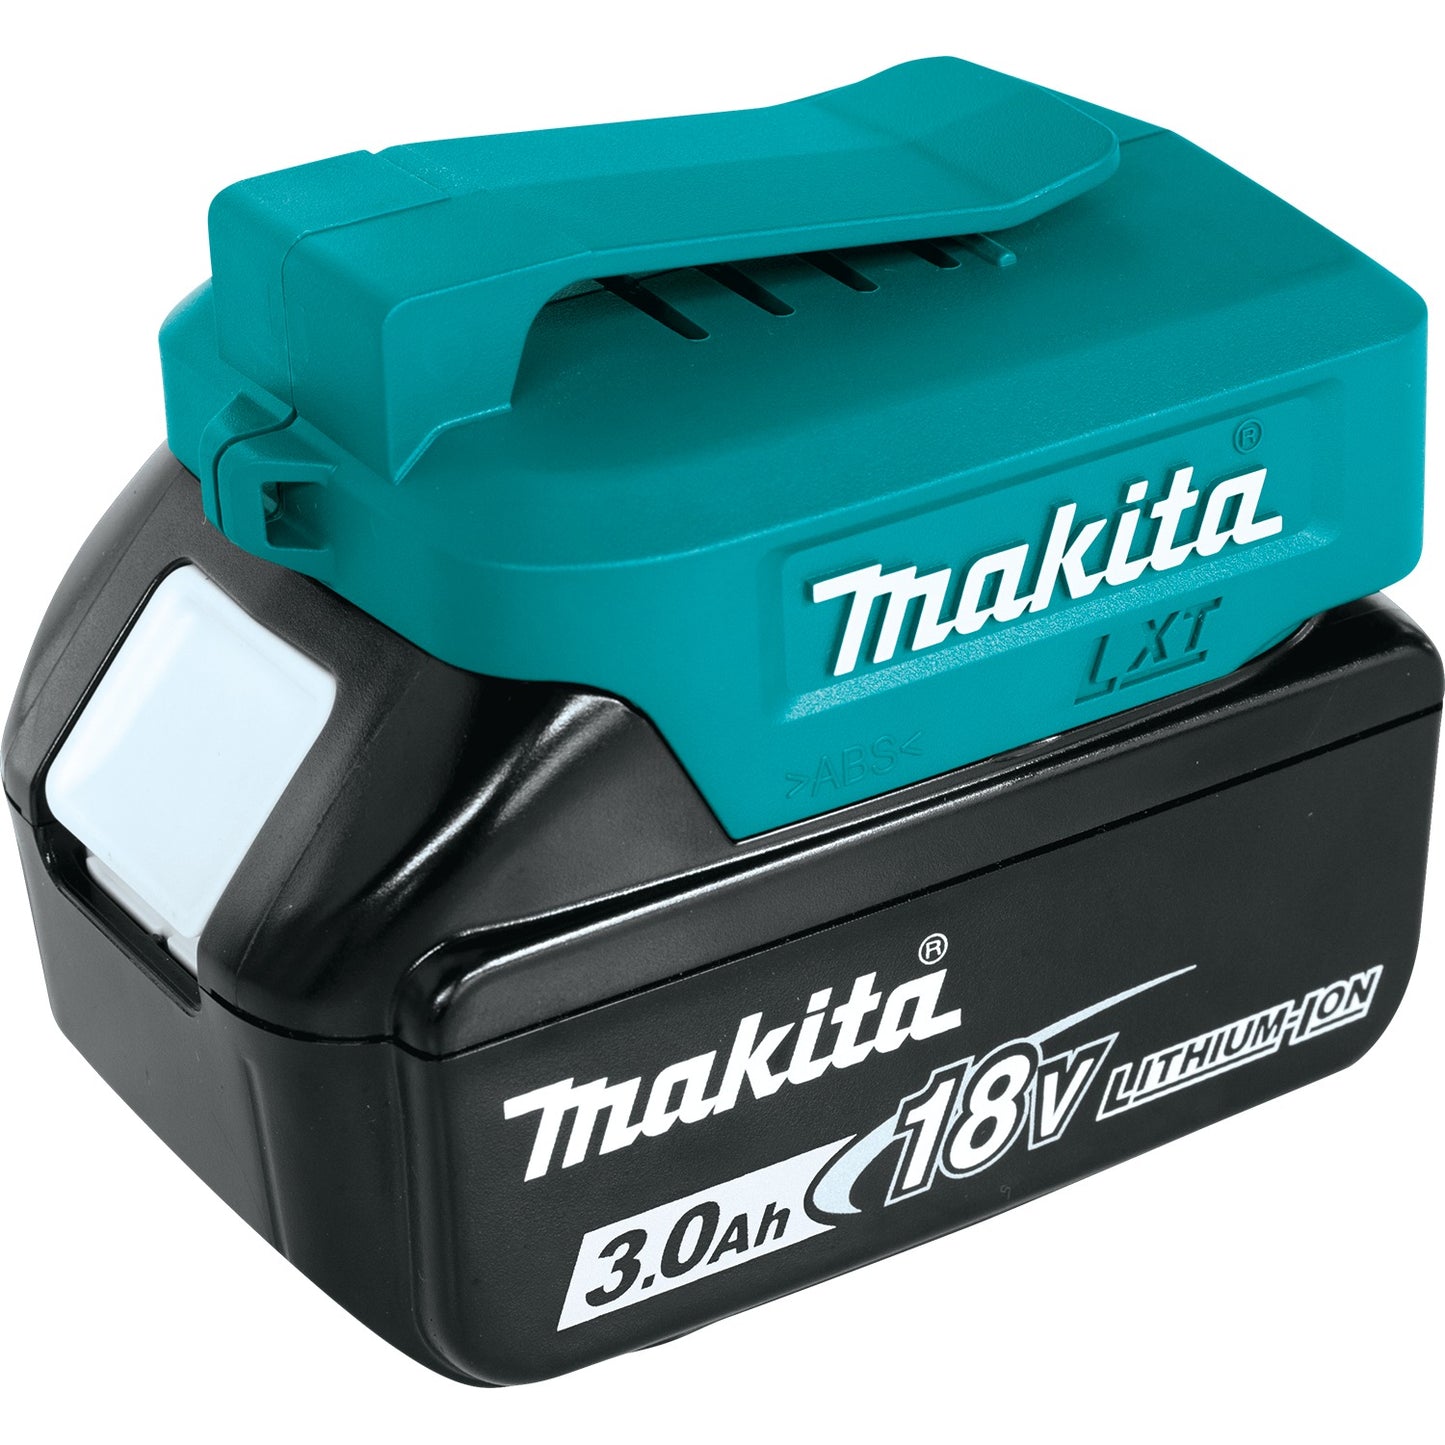 Makita ADP05 18V Lxt® Lithiumion Cordless Power Source, Power Source Only